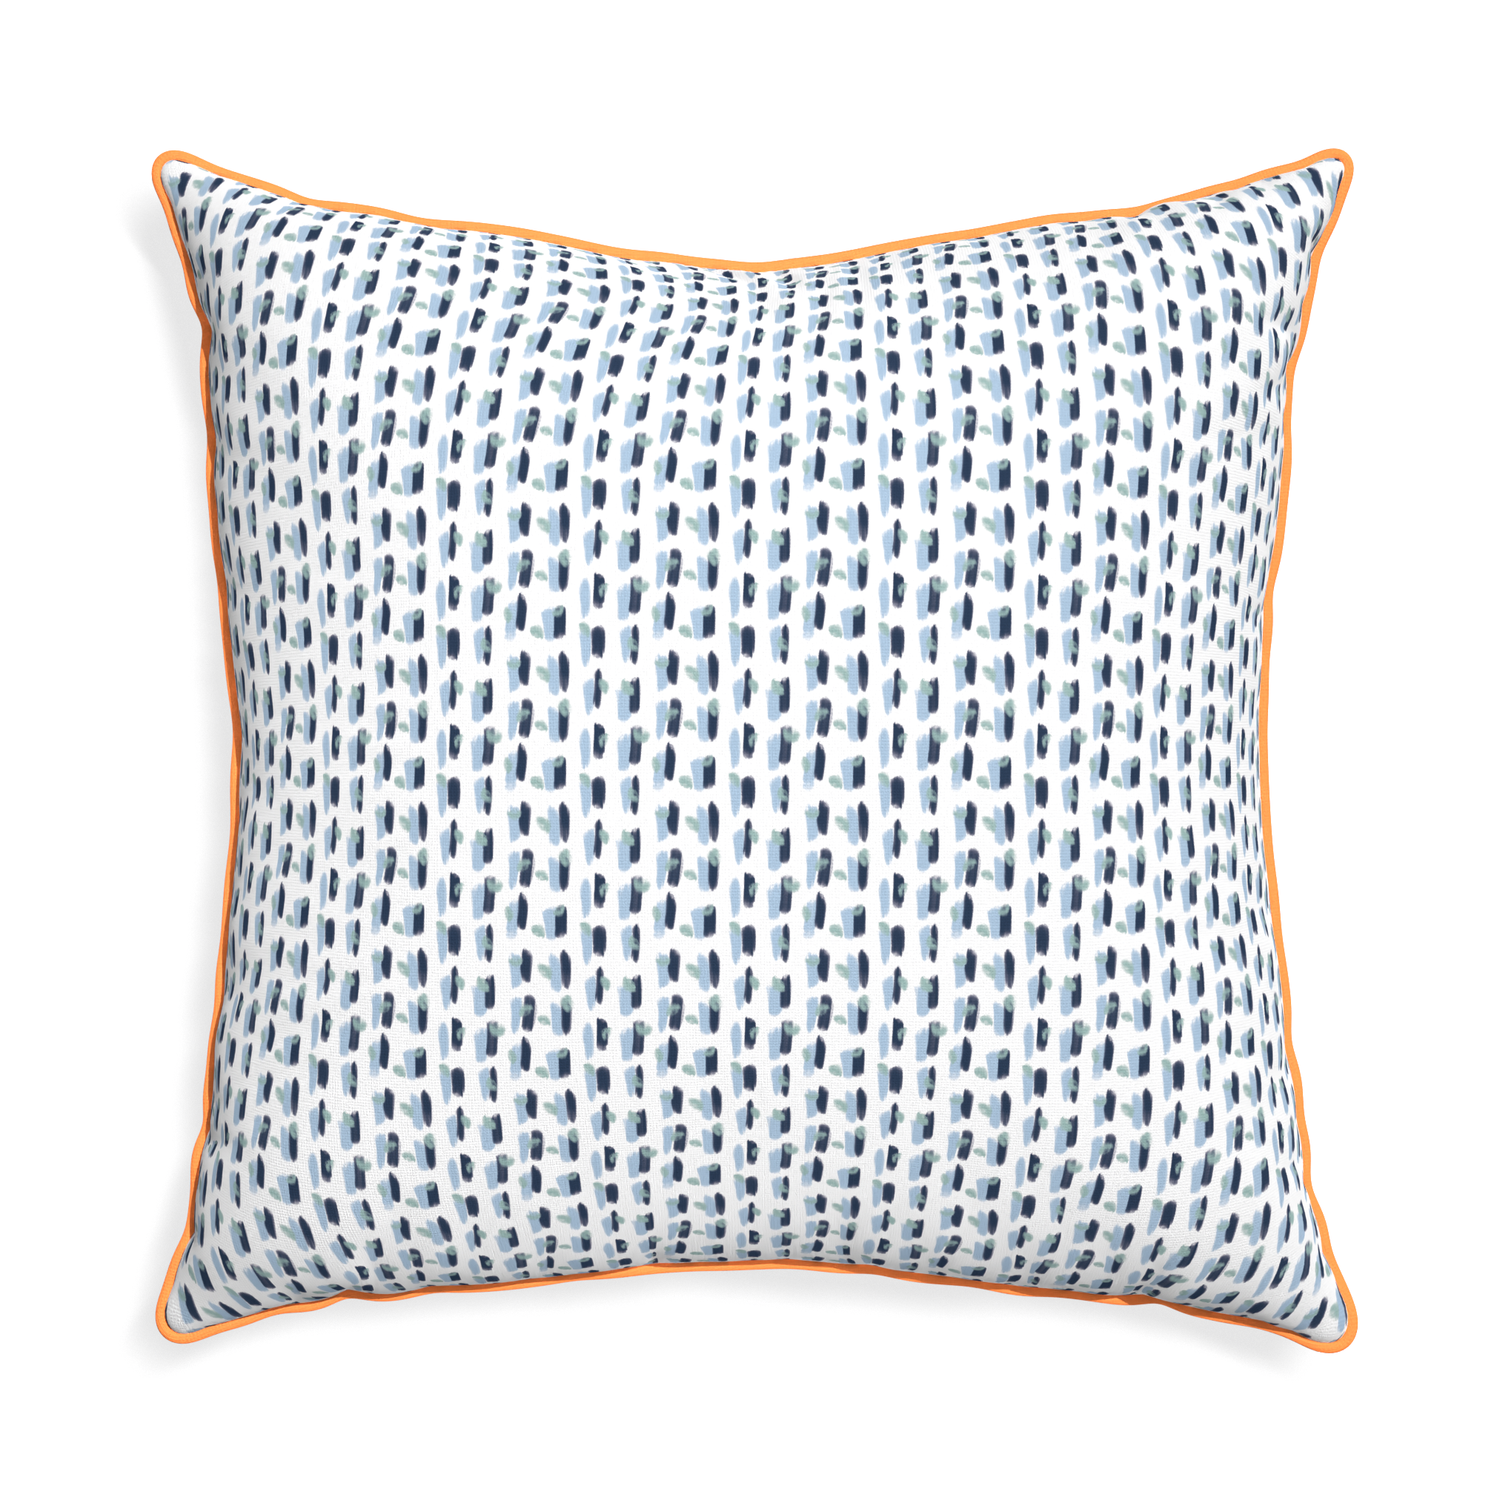 Euro-sham poppy blue custom pillow with clementine piping on white background